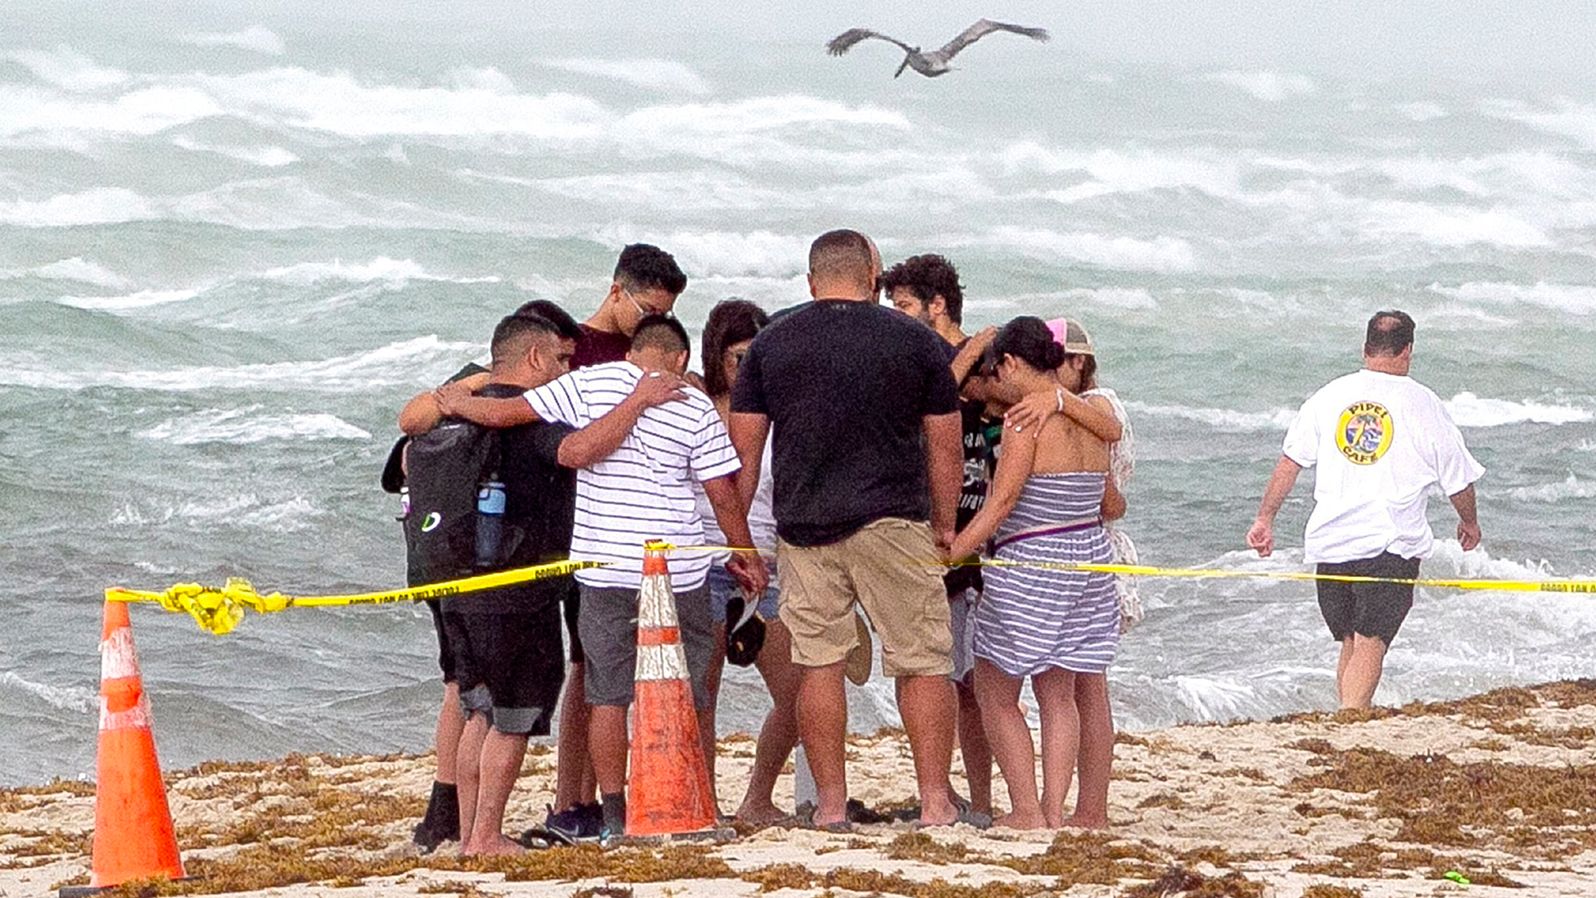 People pray together on the beach near the collapsed building.